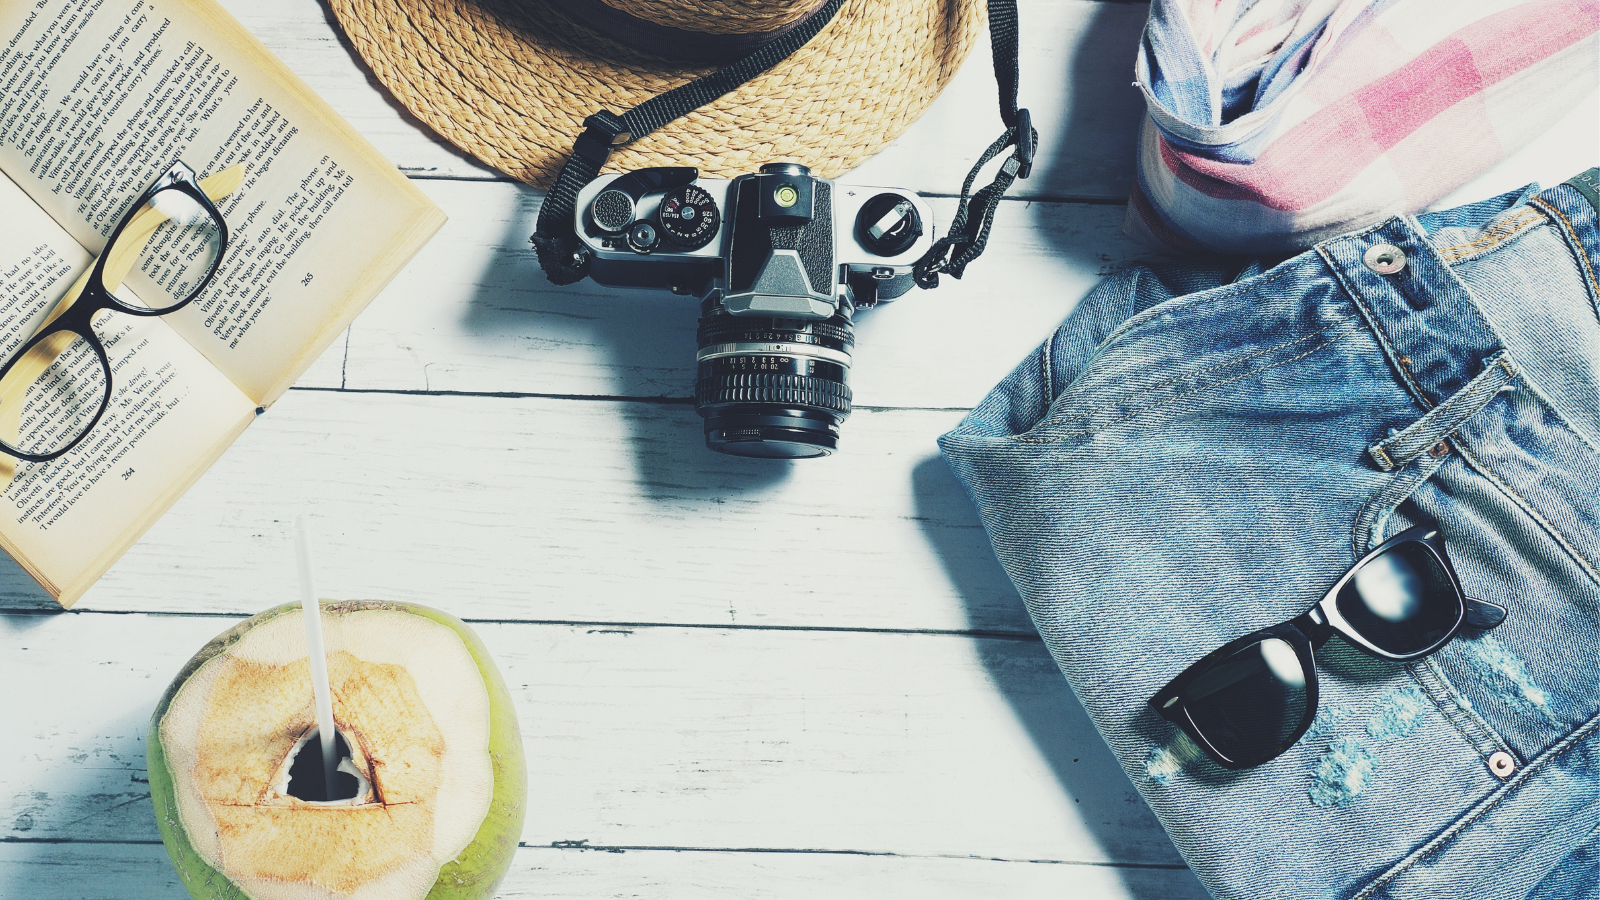 Camera, book, hat, shorts and sunglasses laid out on wooden flooring